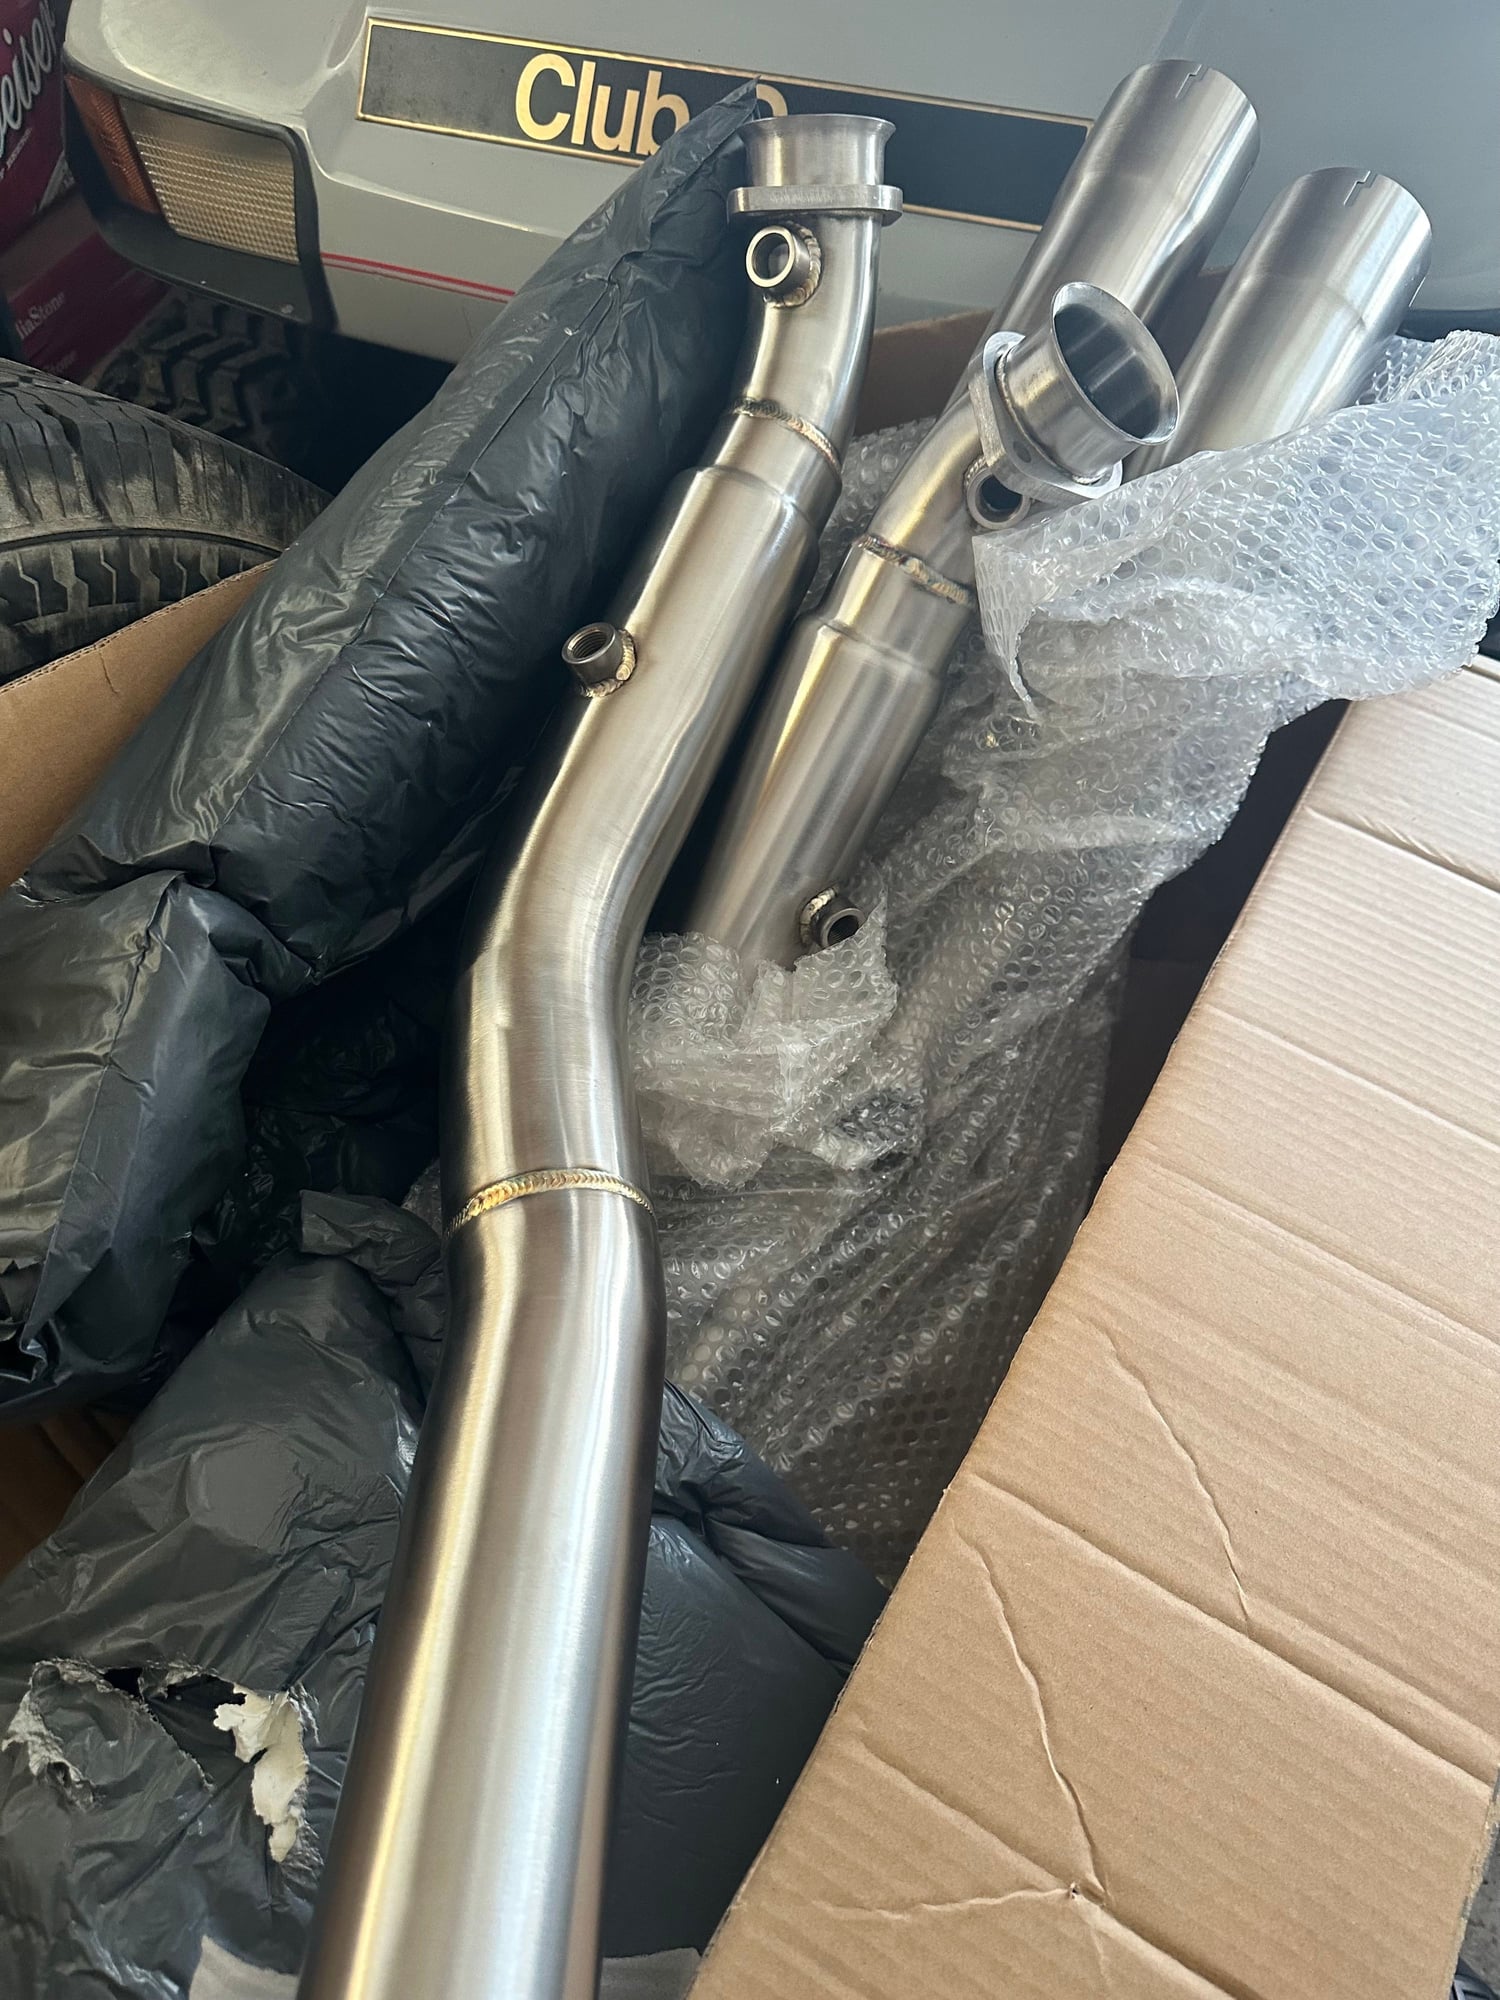 Engine - Exhaust - M157 Catless Downpipe - New - -1 to 2024  All Models - -1 to 2024  All Models - -1 to 2024  All Models - -1 to 2024  All Models - -1 to 2024  All Models - -1 to 2024  All Models - Columbus, OH 43213, United States